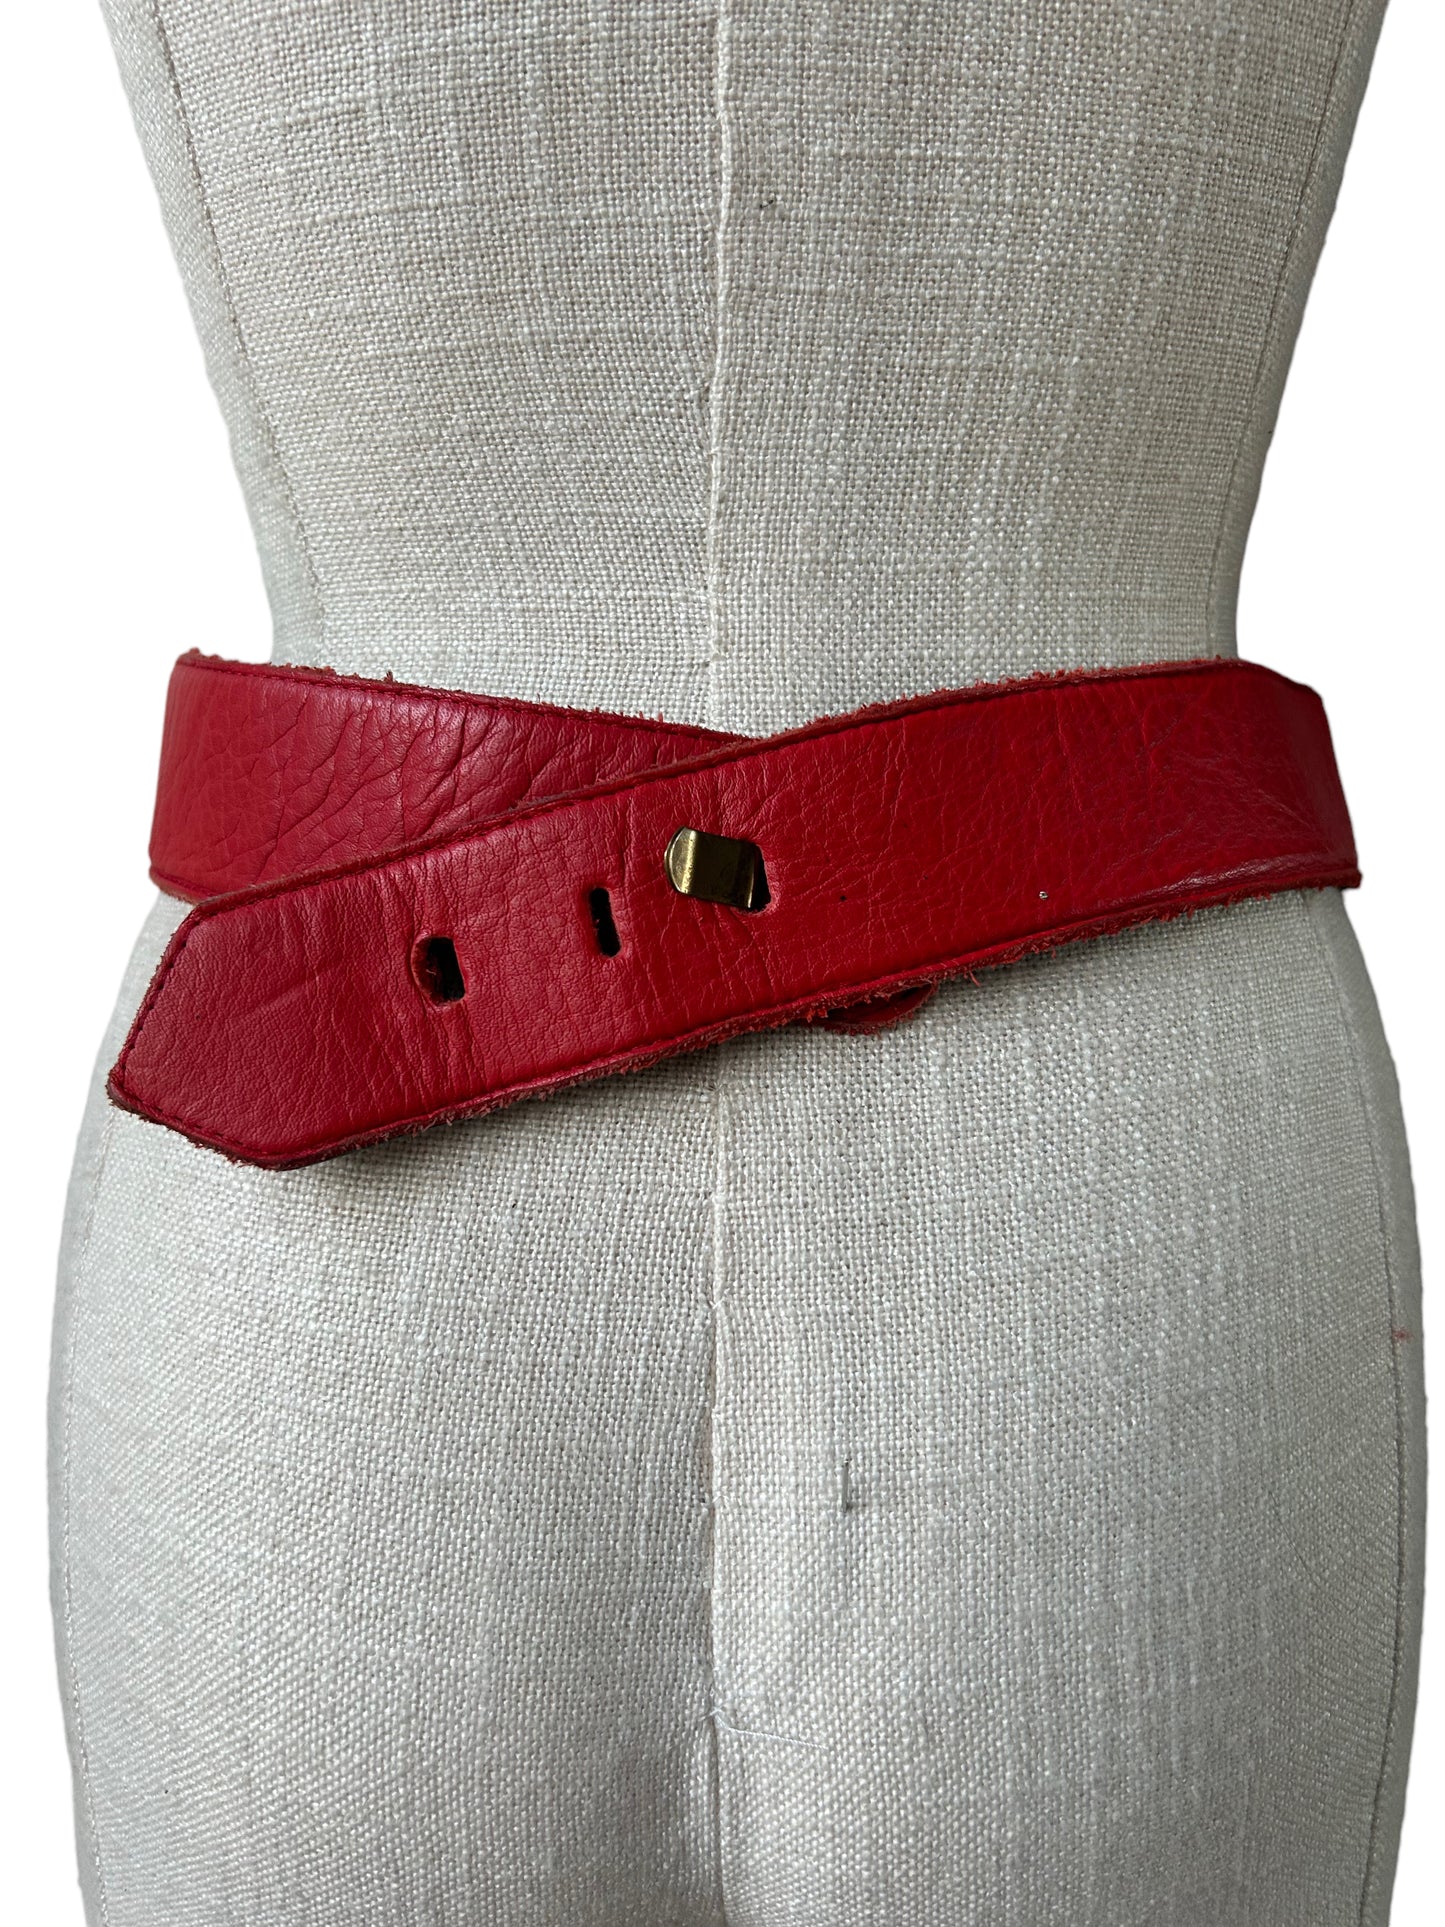 Vintage 1980s French Red Leather Avant Garde Statement Belt